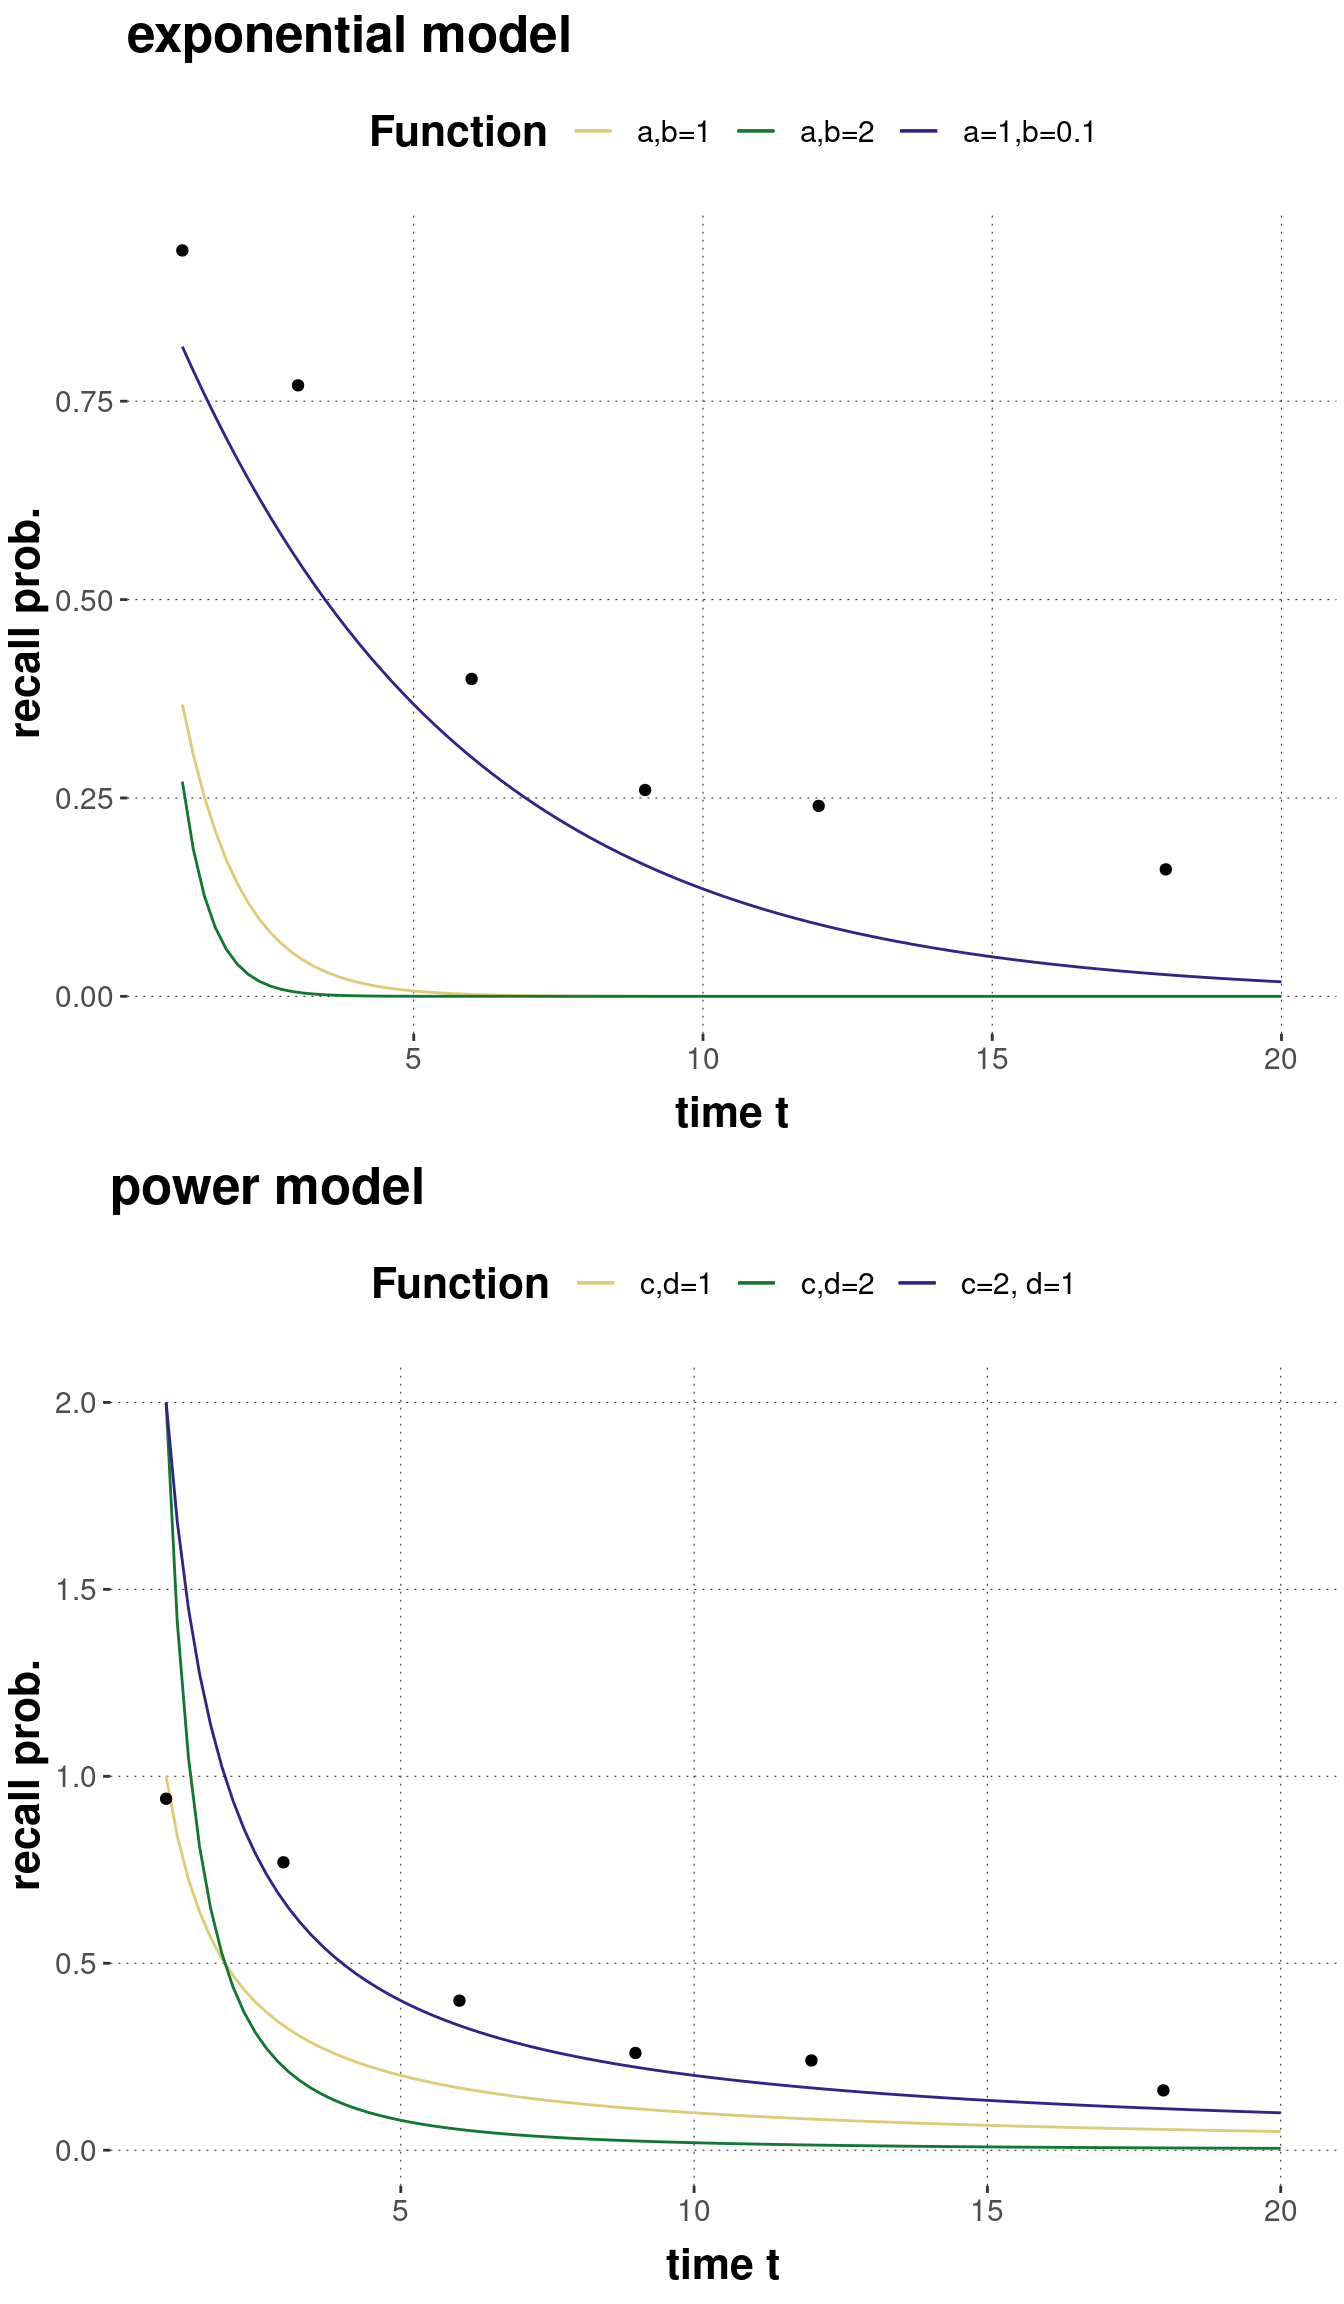 Examples of predictions of the exponential and the power model of forgetting for different values of each model's parameters.